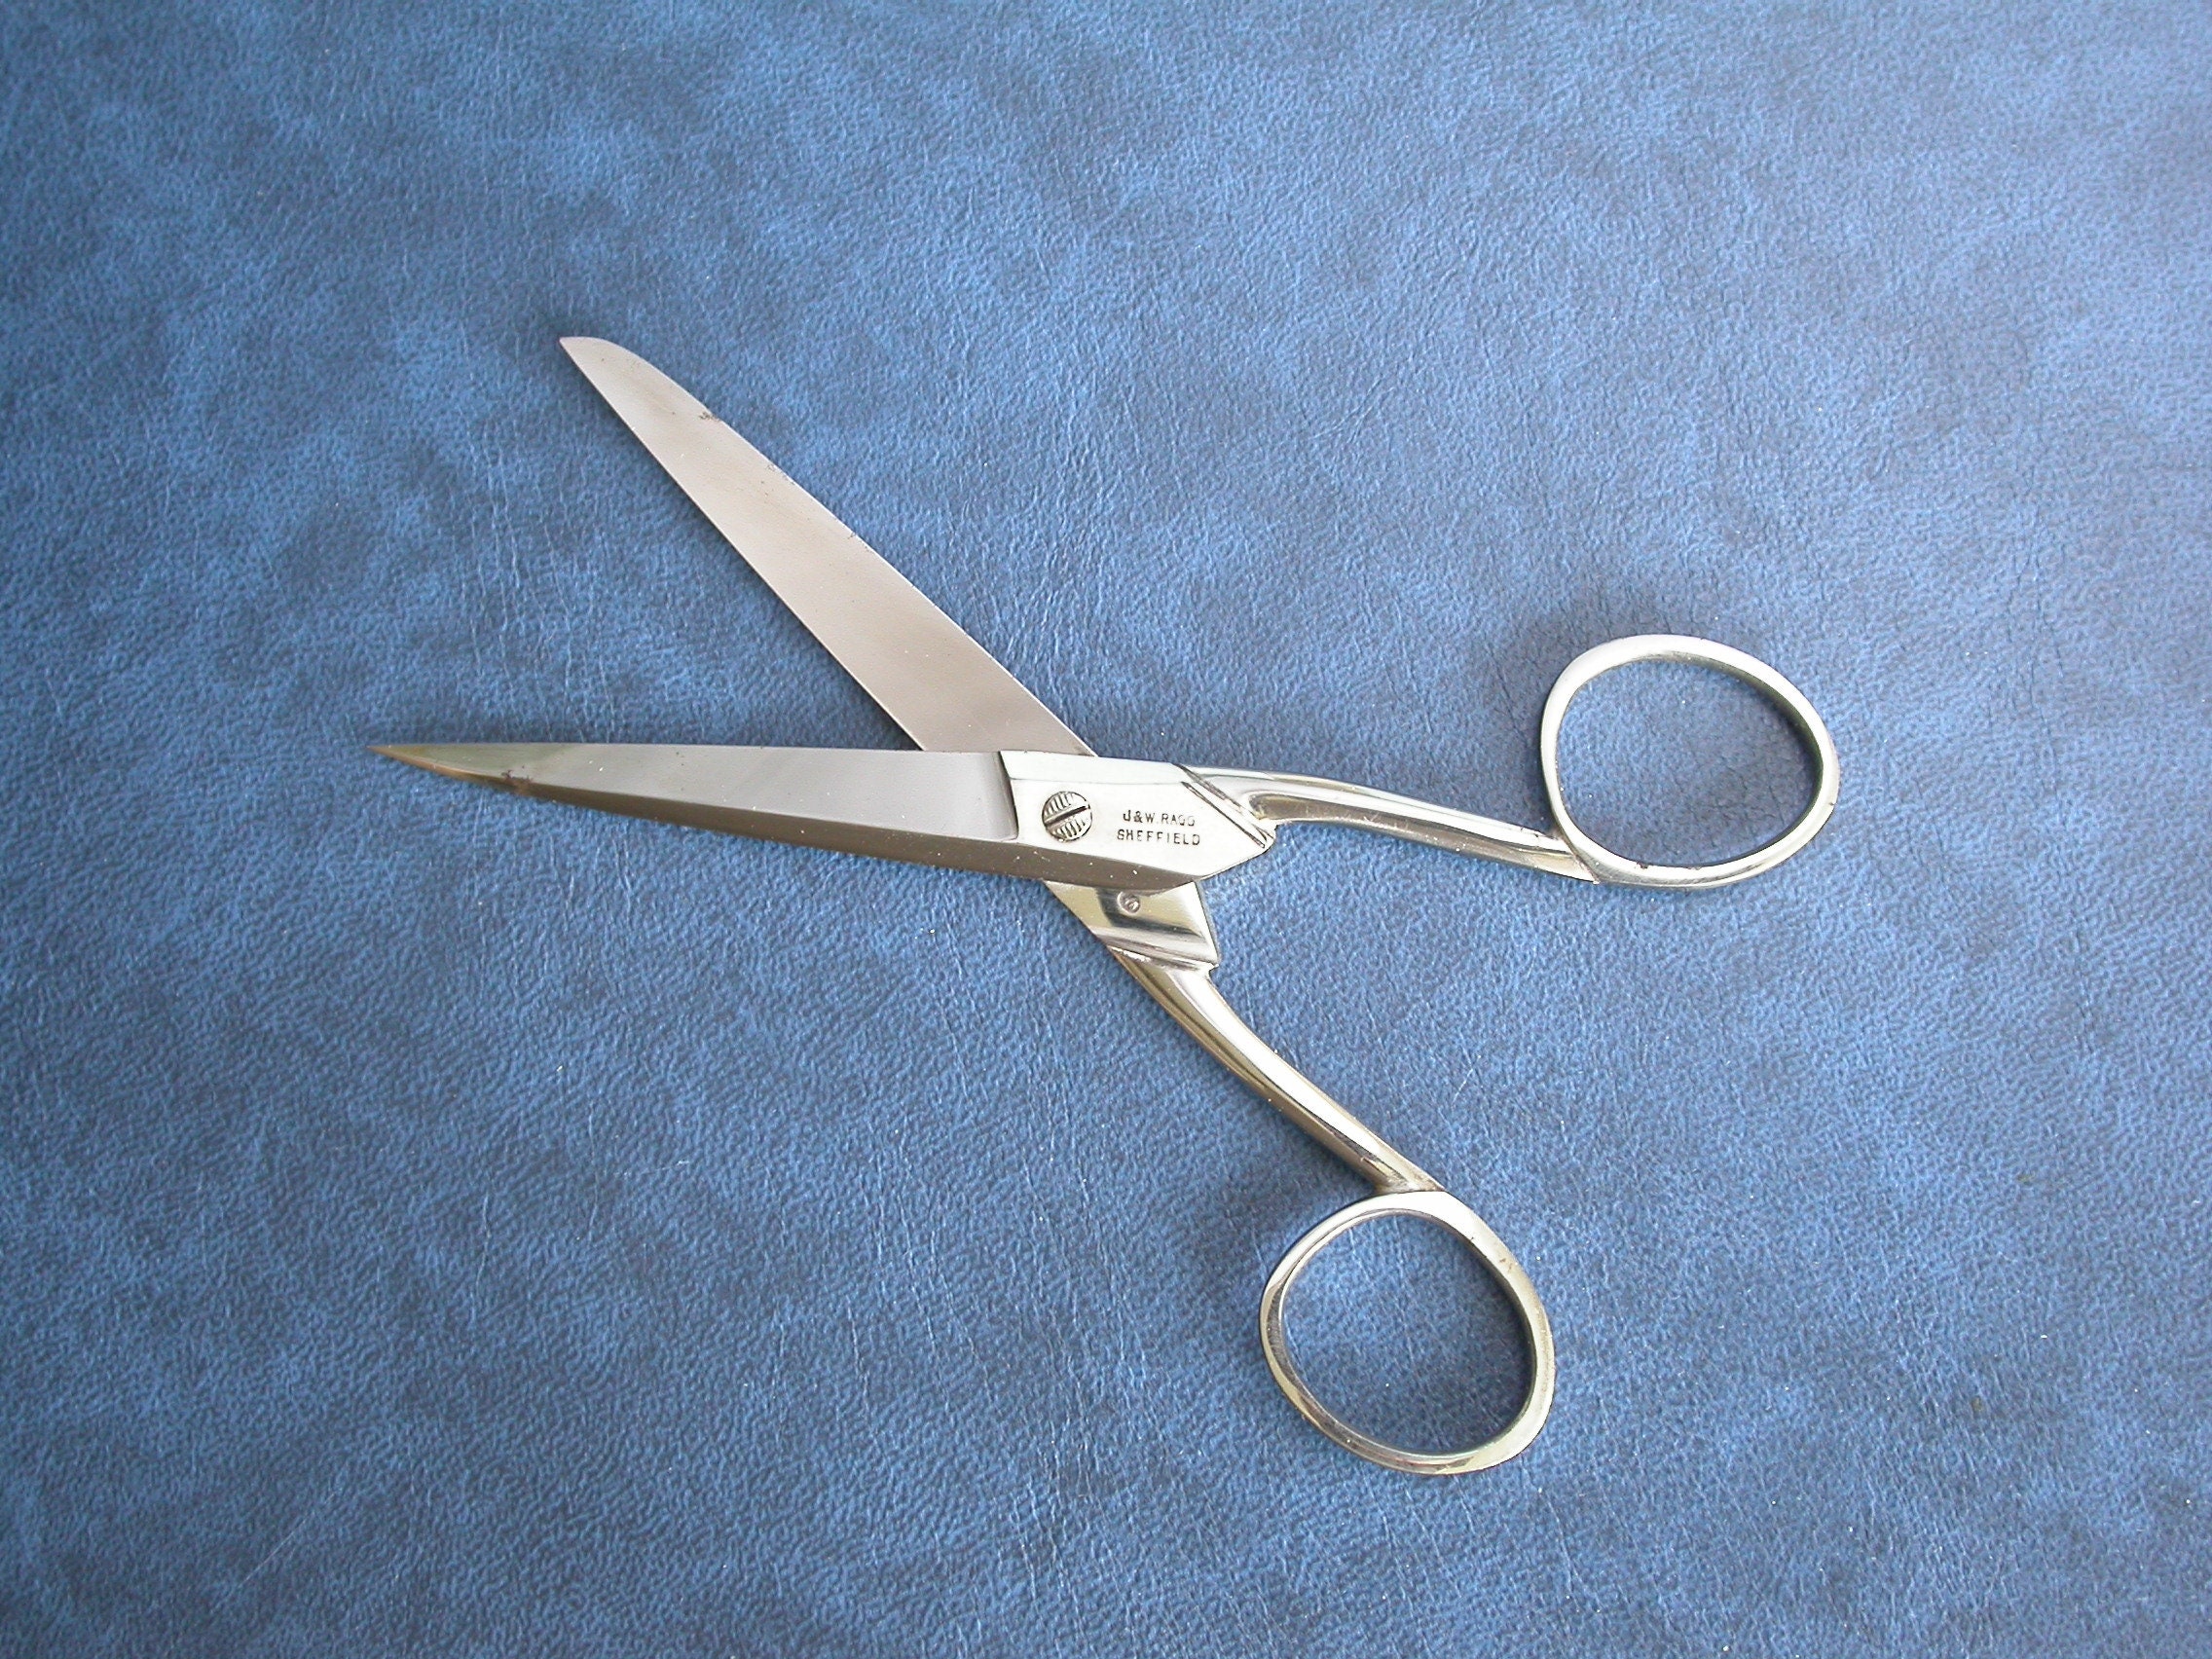 Victorian Sewing Scissors Germany, Grotesque Face Antique Scissors